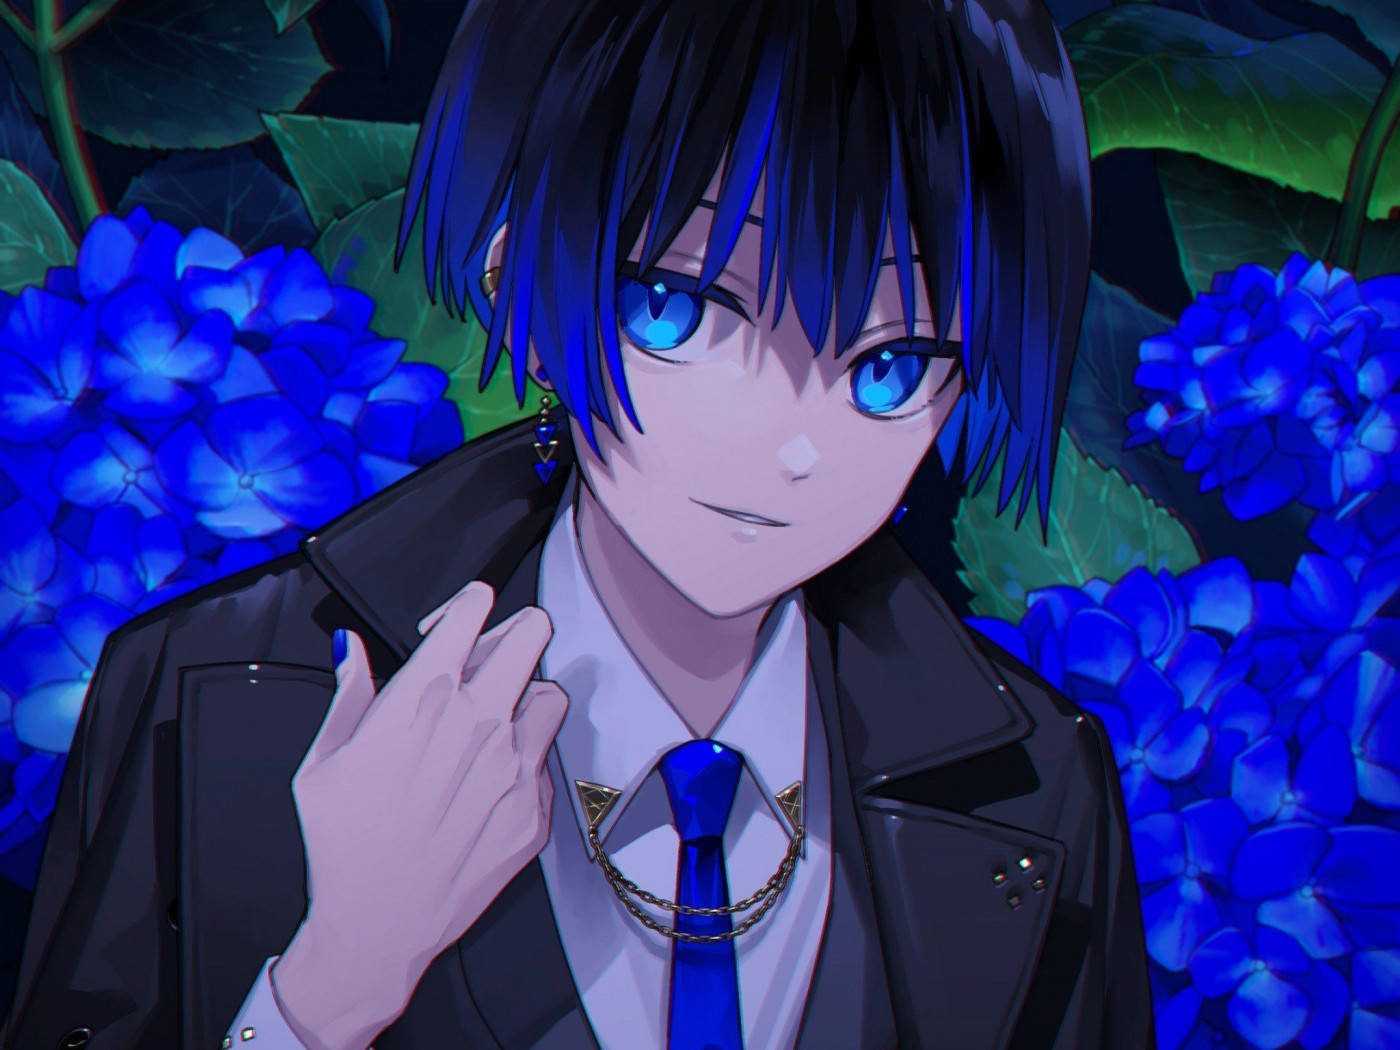 Anime Blue Boy On A Floral Background Wallpaper